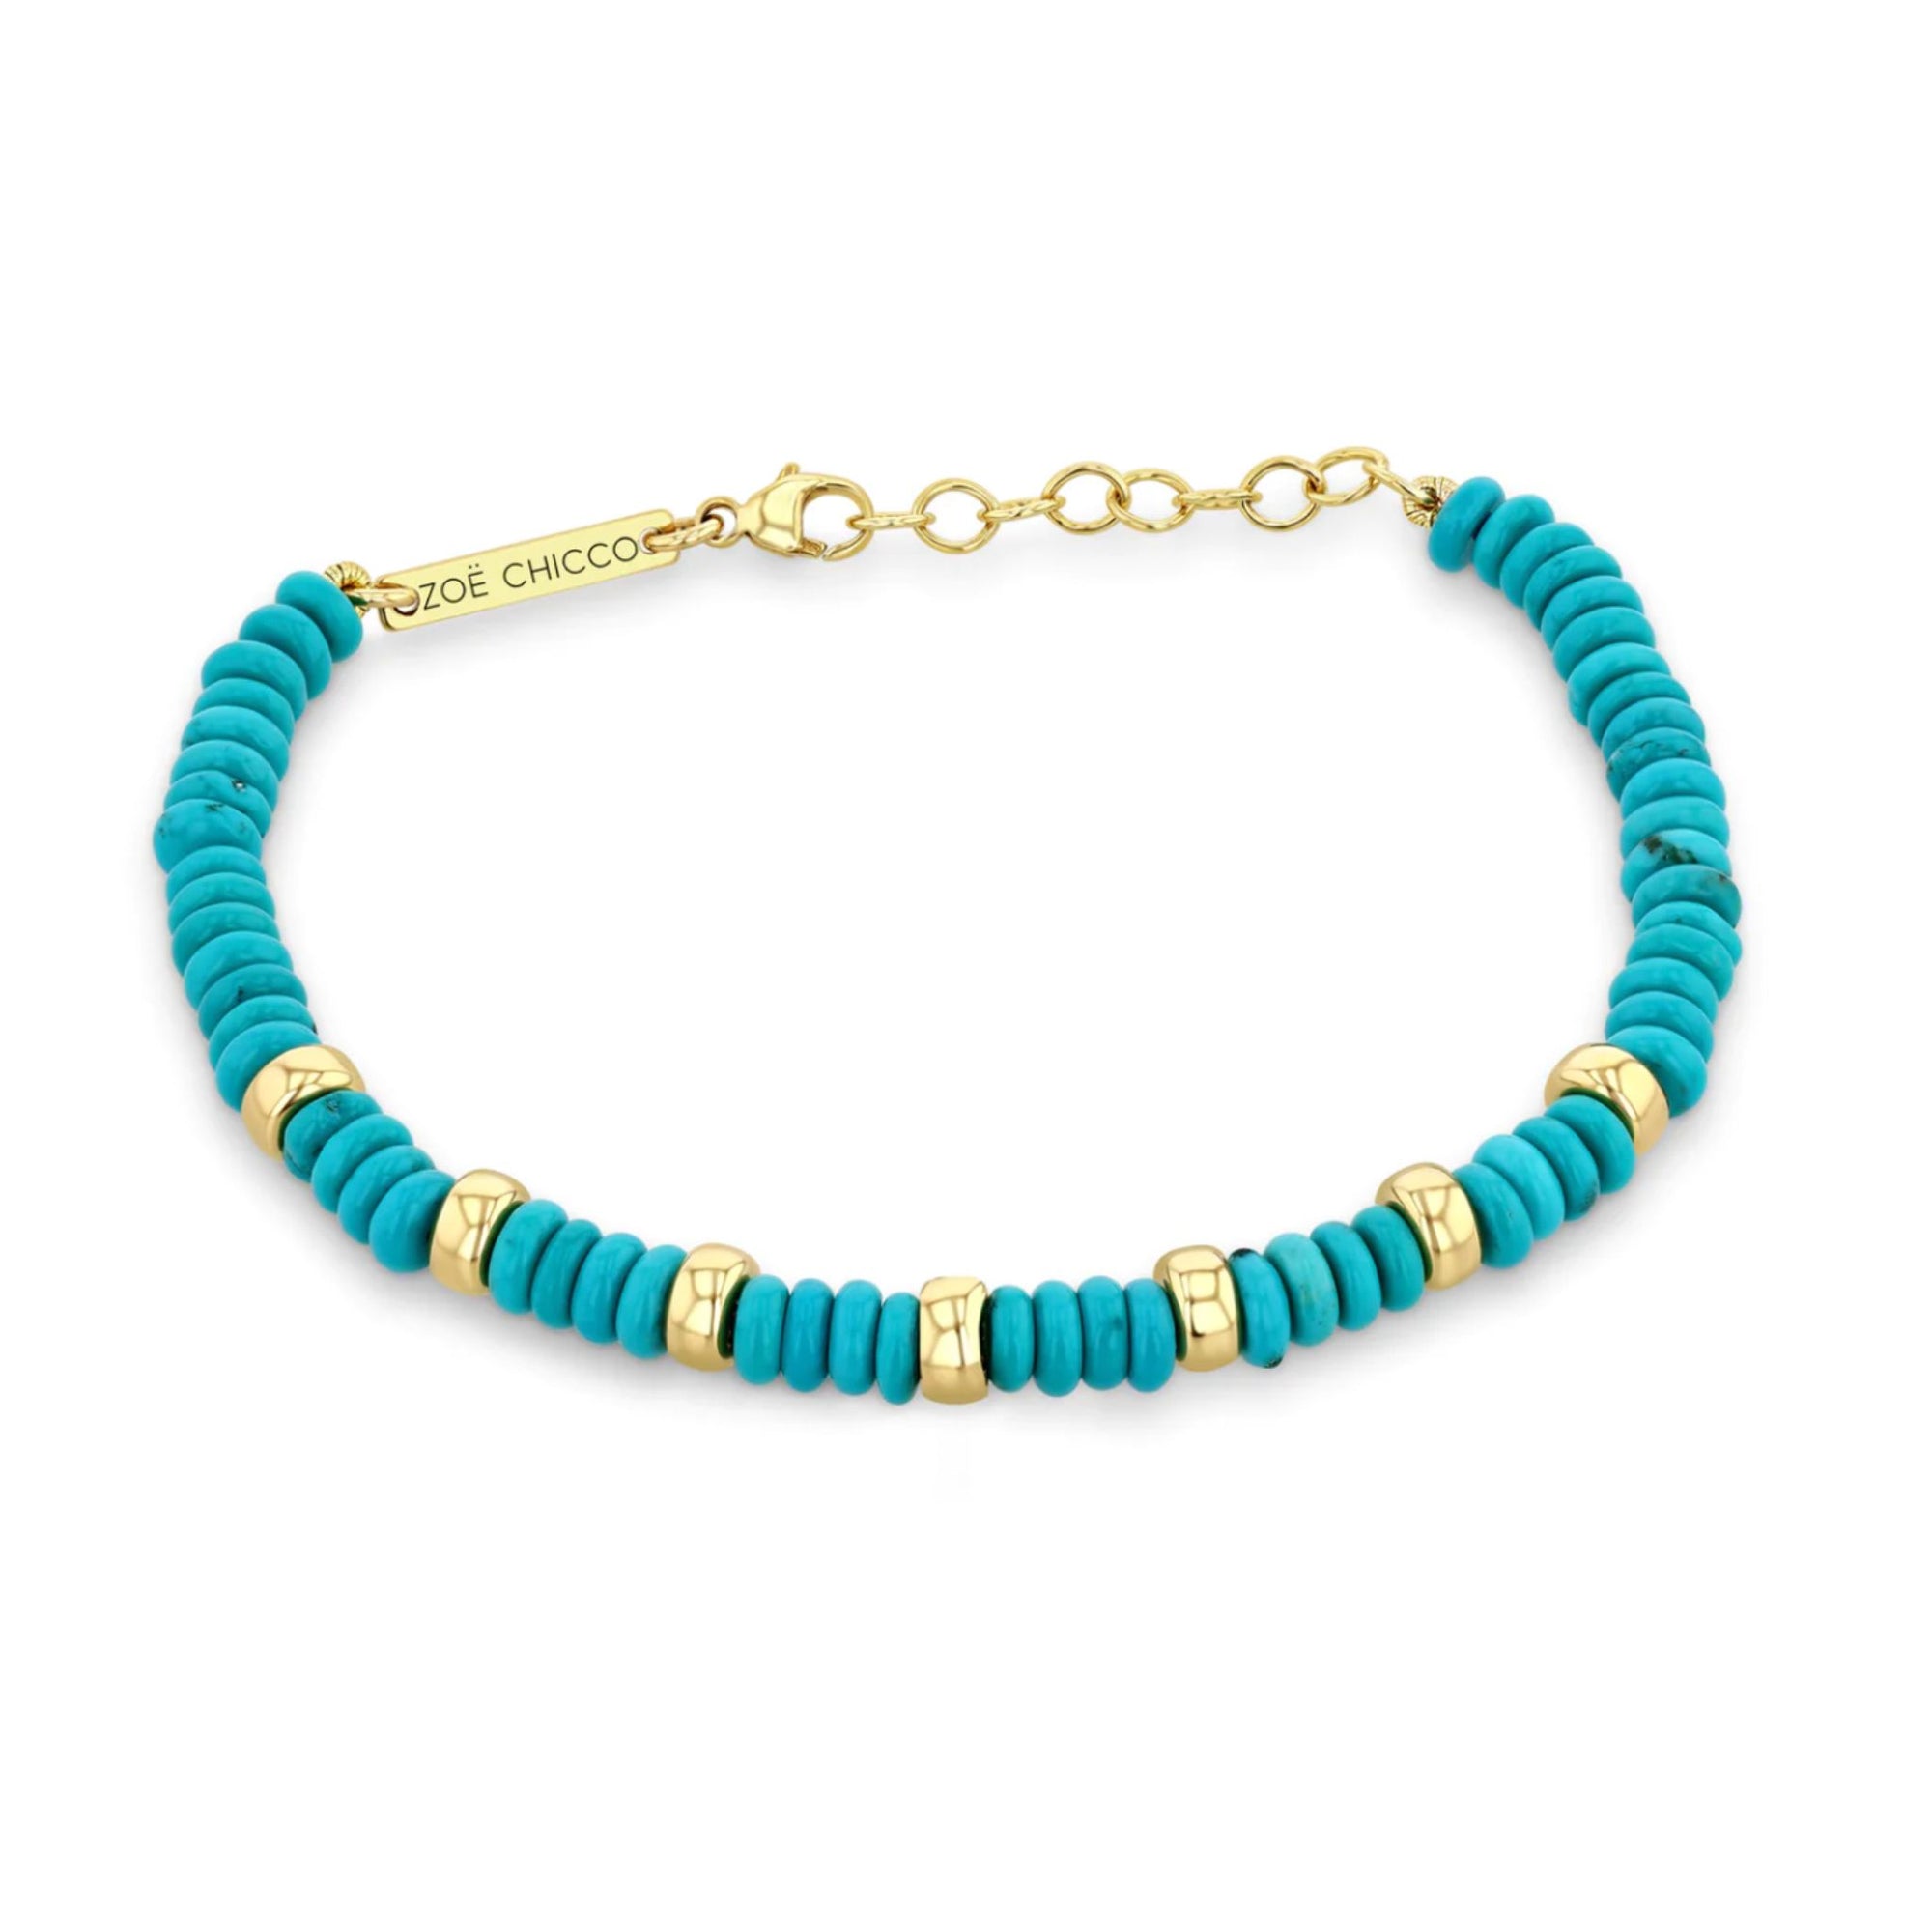 Zoe Chicco 14k Gold and Turquoise Rondelle Bead Bracelet